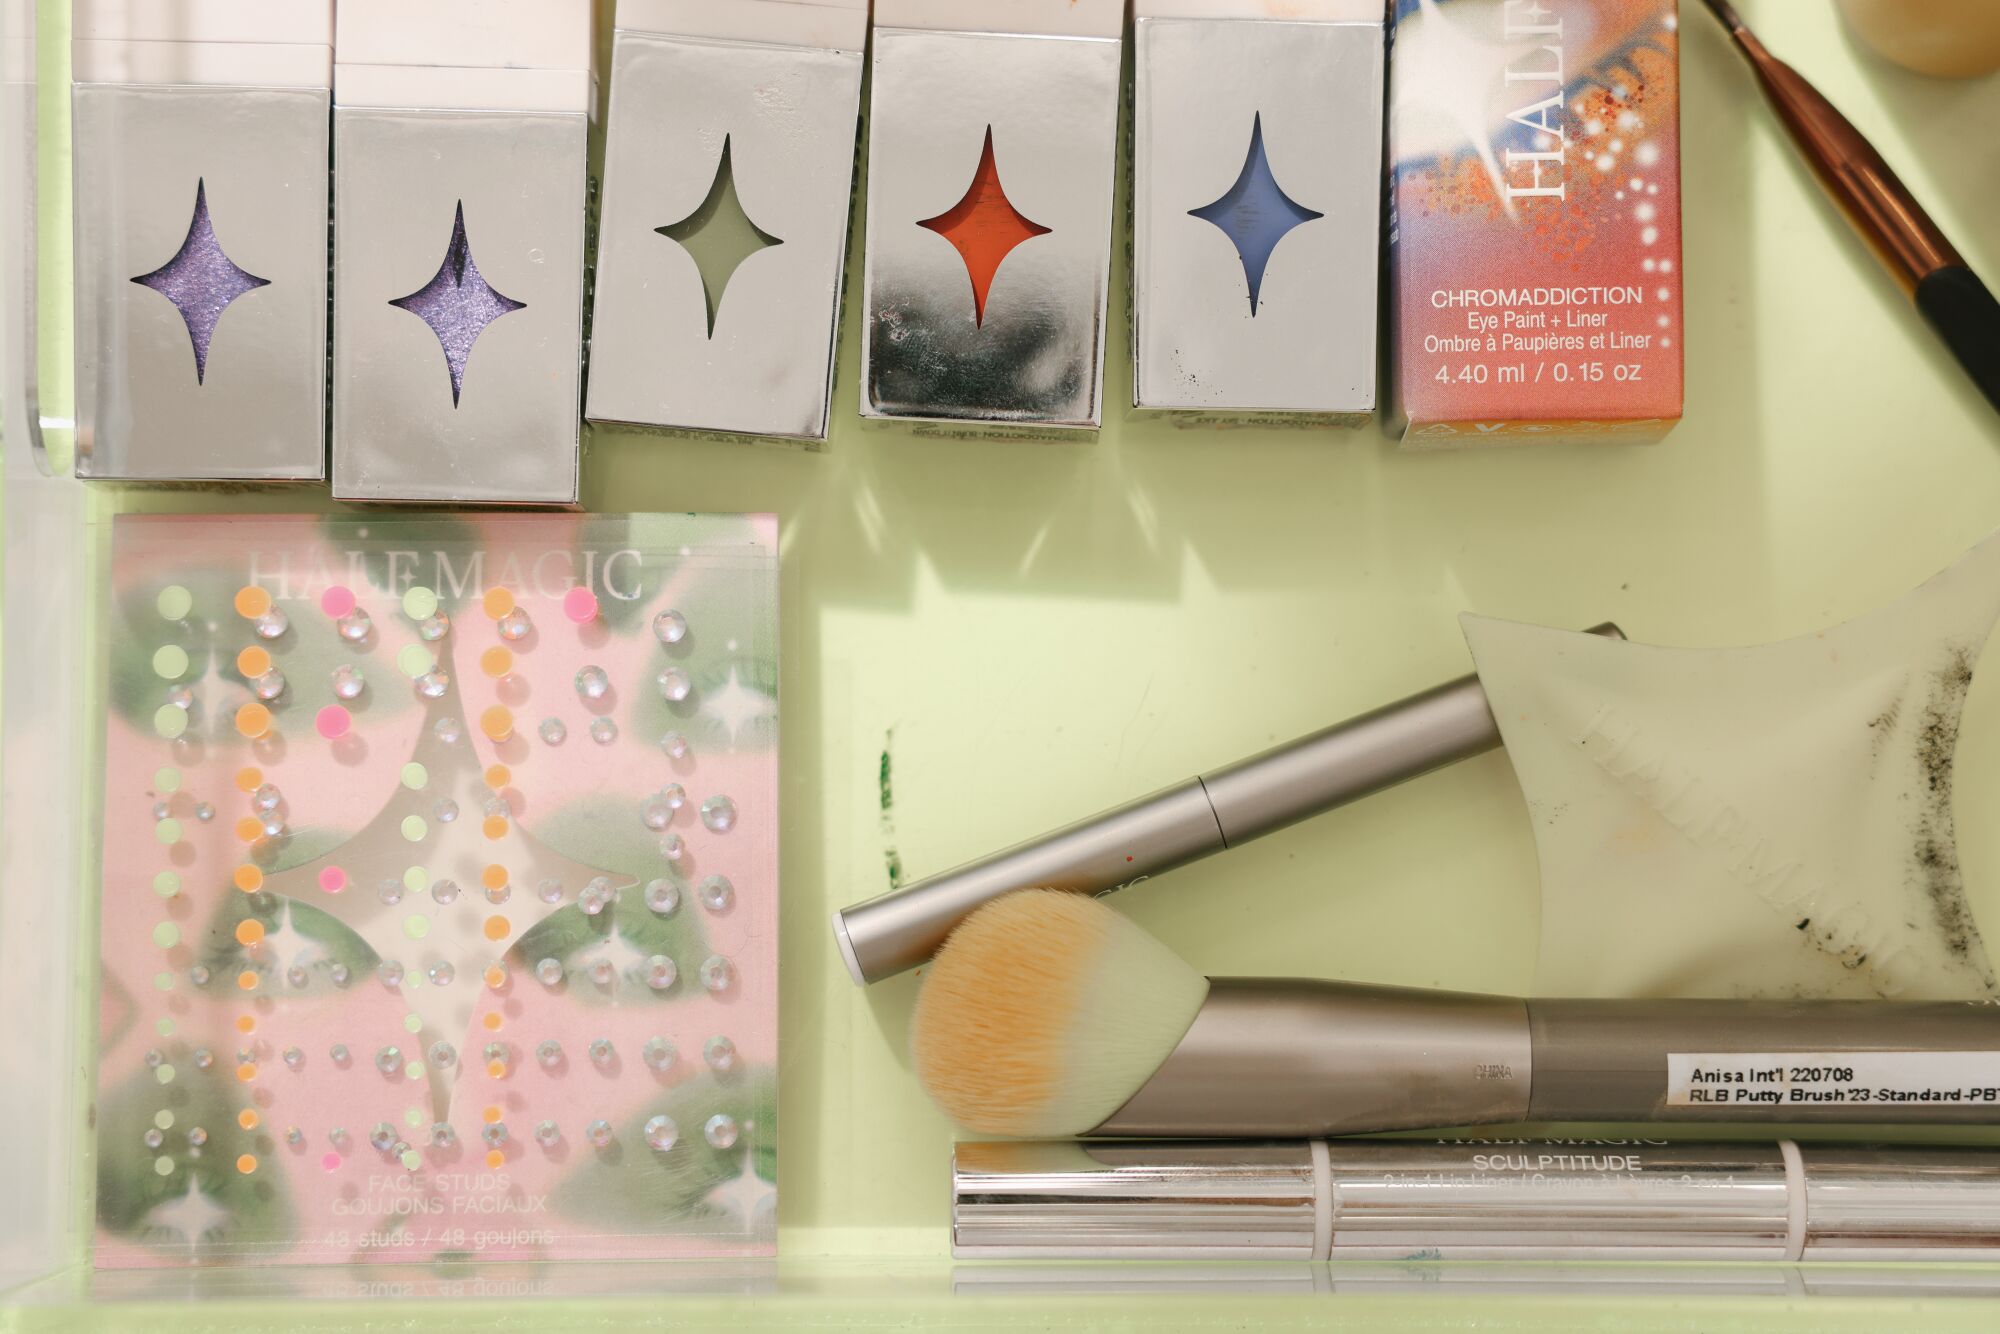 Brushes, rhinestones and pigmented makeup in a light green box.